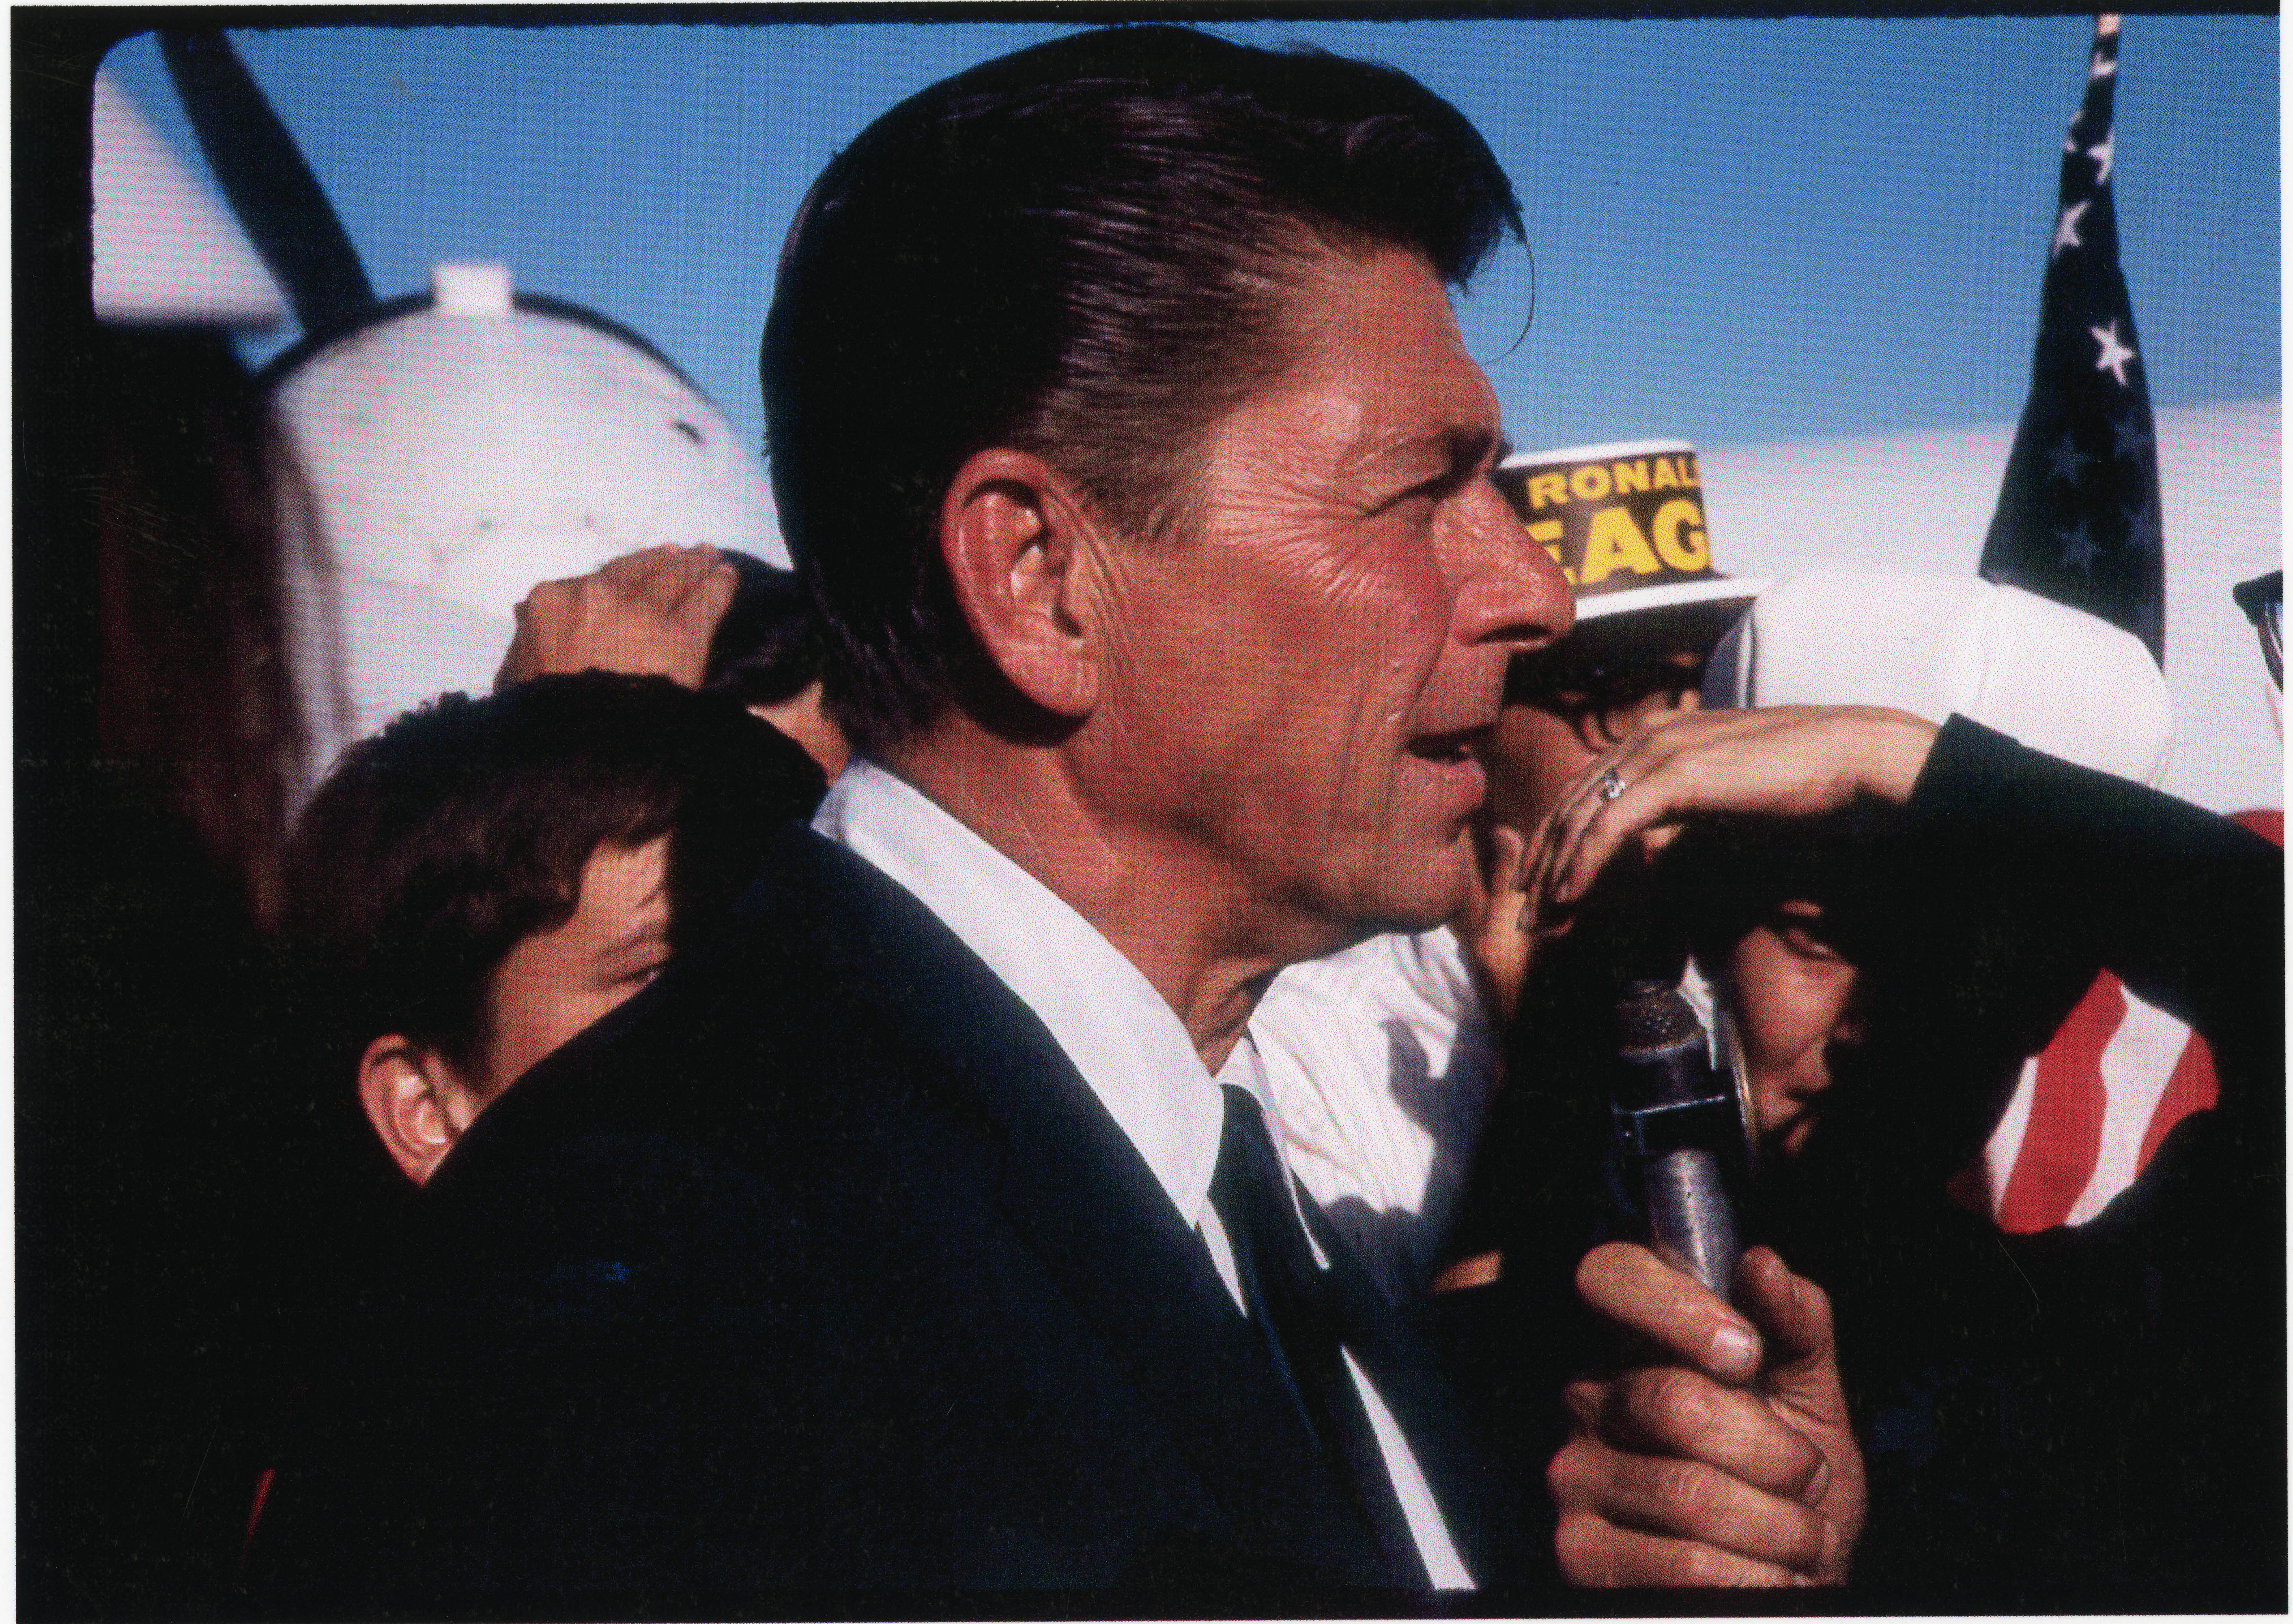 Ronald Reagan campaigning for Governor of California